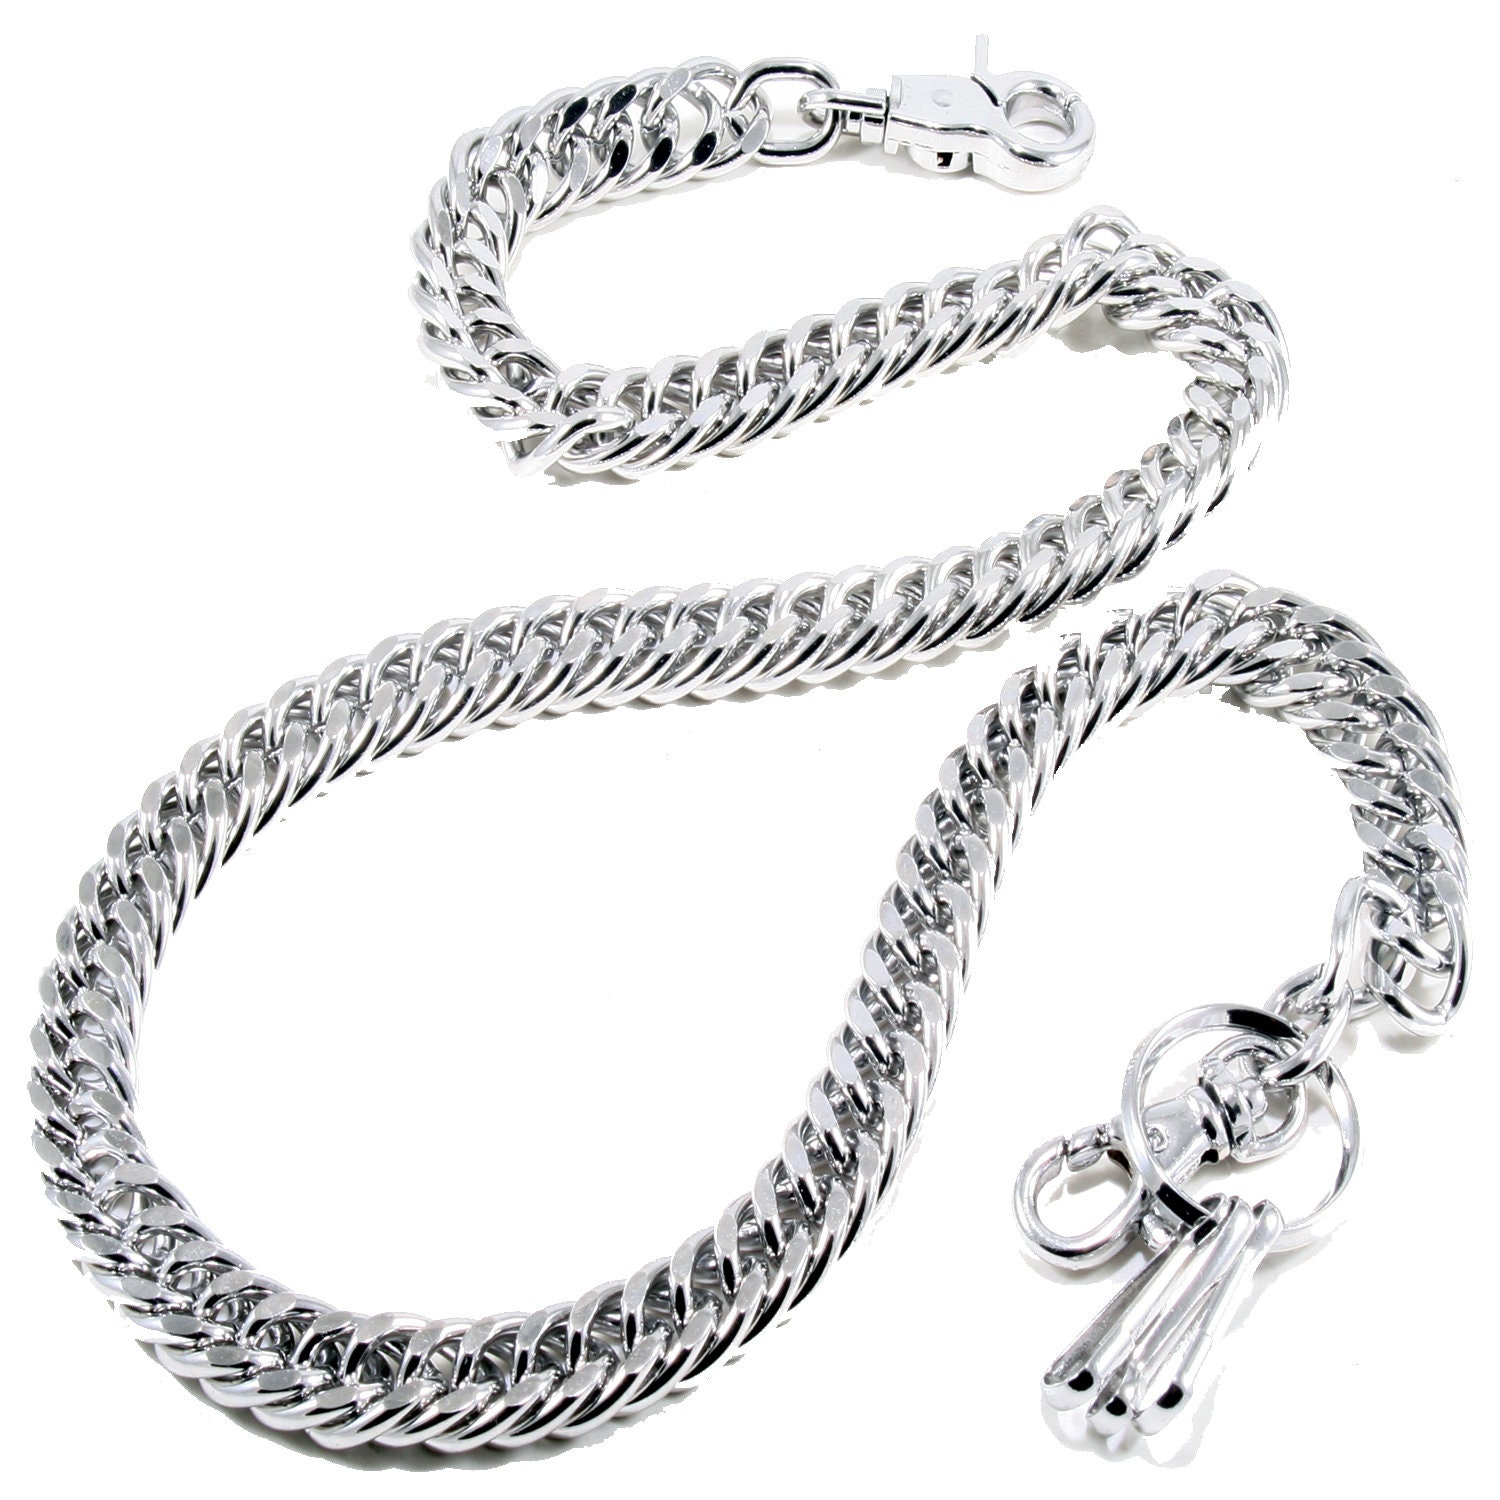 Its 4 You Stylish Multi Layer,Wallet Chain Chain For Womens,Mens And Boys Sterling Silver Plated Stainless Steel Chain